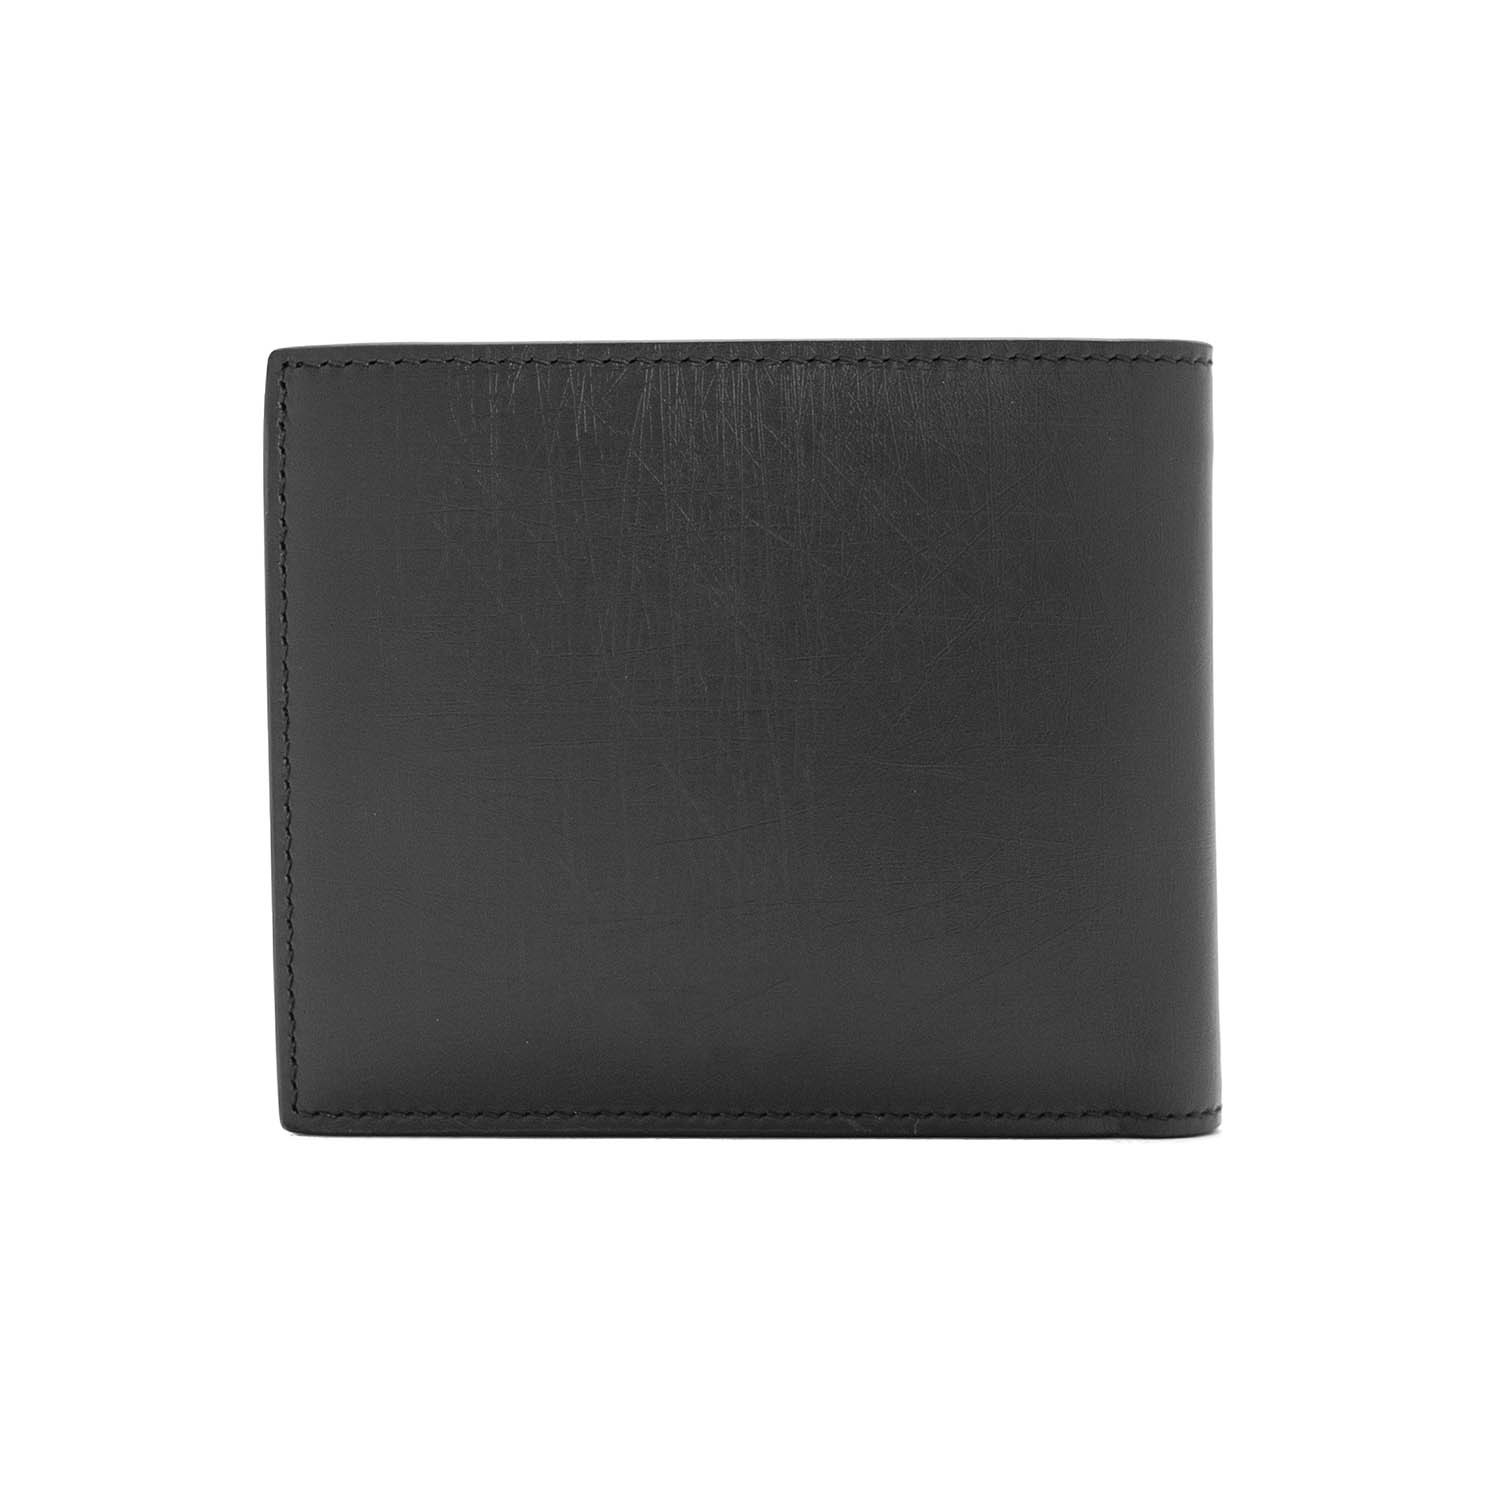 Cracked Leather Bifold Wallet V1 // Black - Dior - Touch of Modern